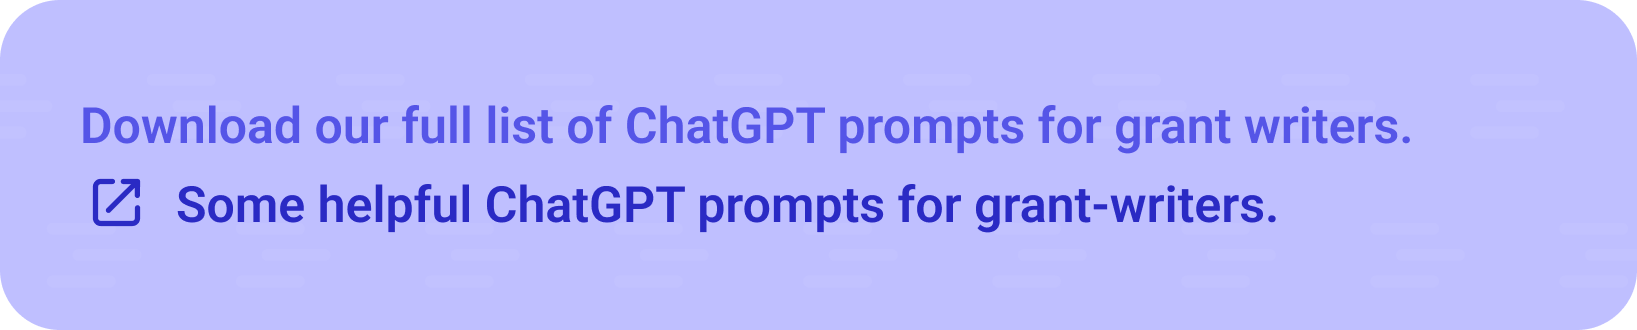 Download our full list of ChatGPT prompts for nonprofit grant writers.